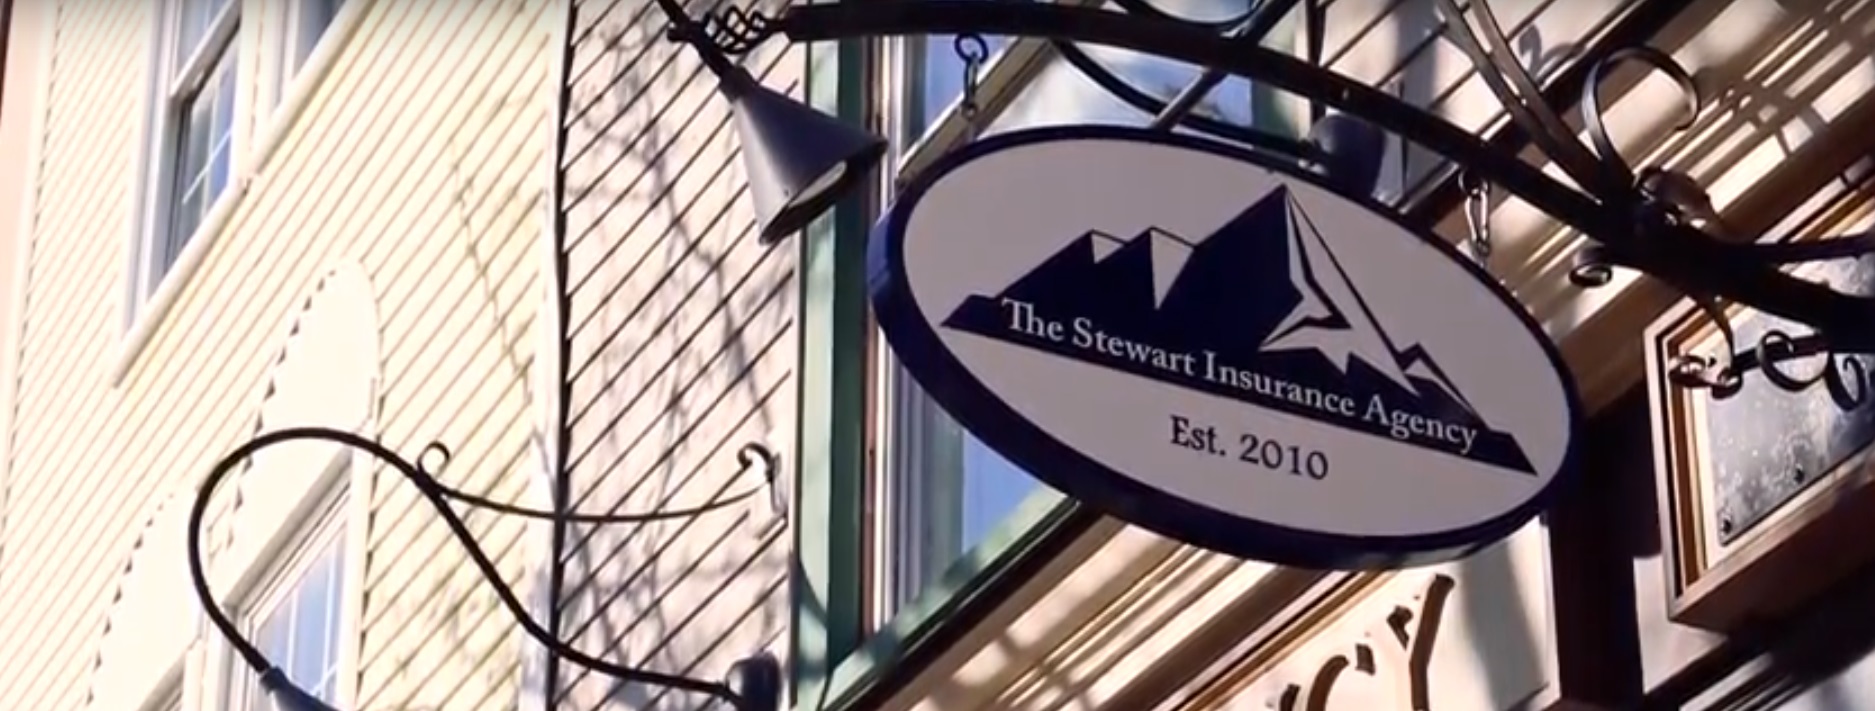 The Stewart Insurance Agency sign